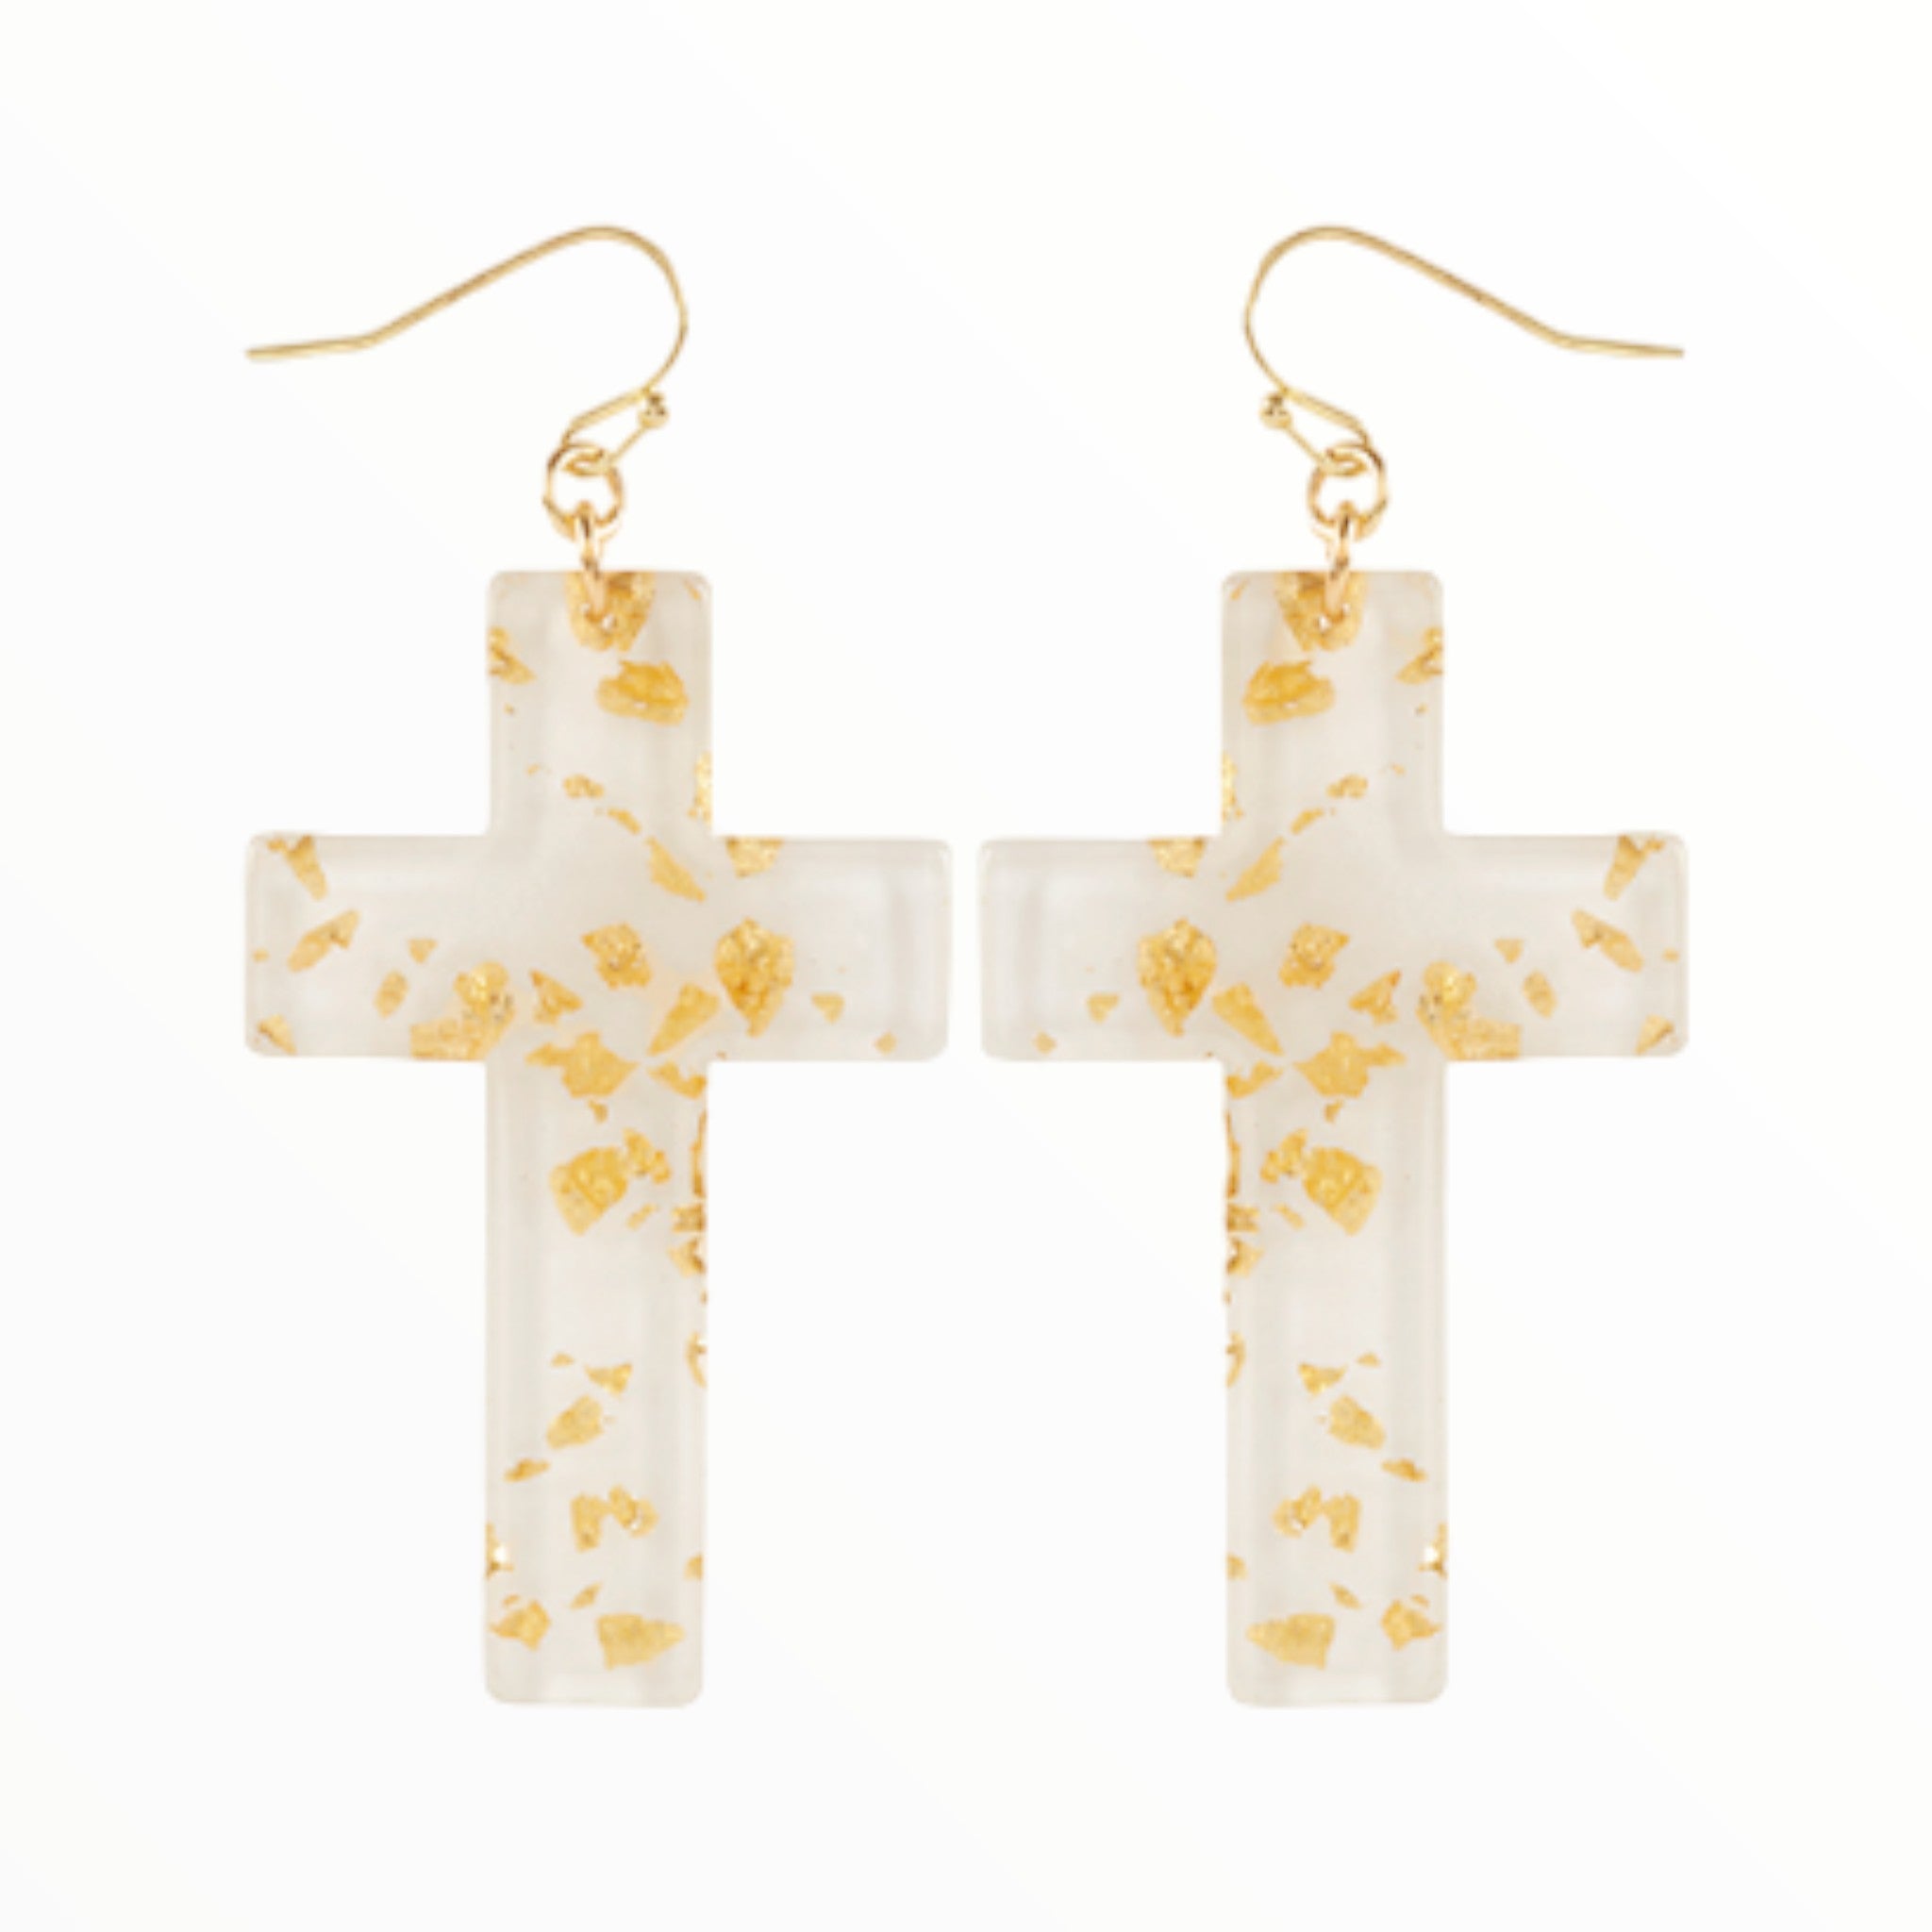 White & Gold Cross Acrylic Earrings-Earrings-LouisGeorge Boutique-LouisGeorge Boutique, Women’s Fashion Boutique Located in Trussville, Alabama